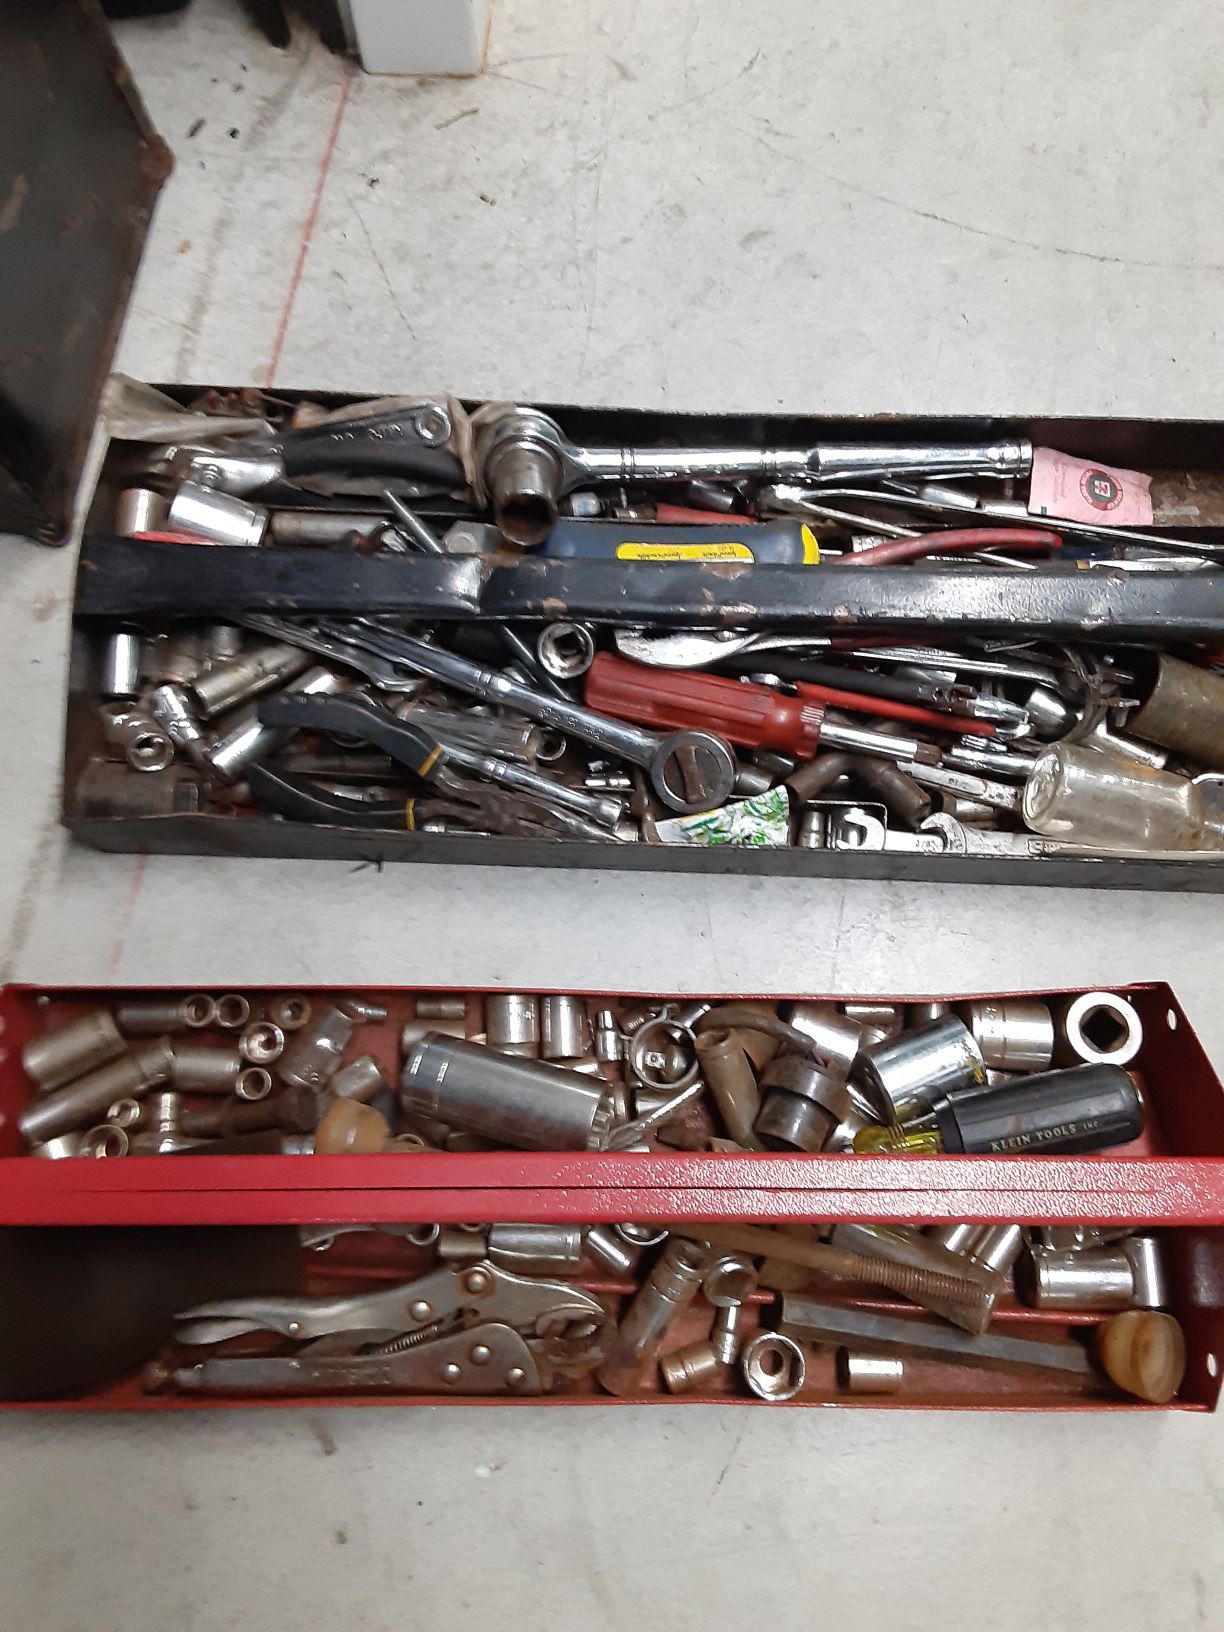 2 tool boxes full of tools$$$